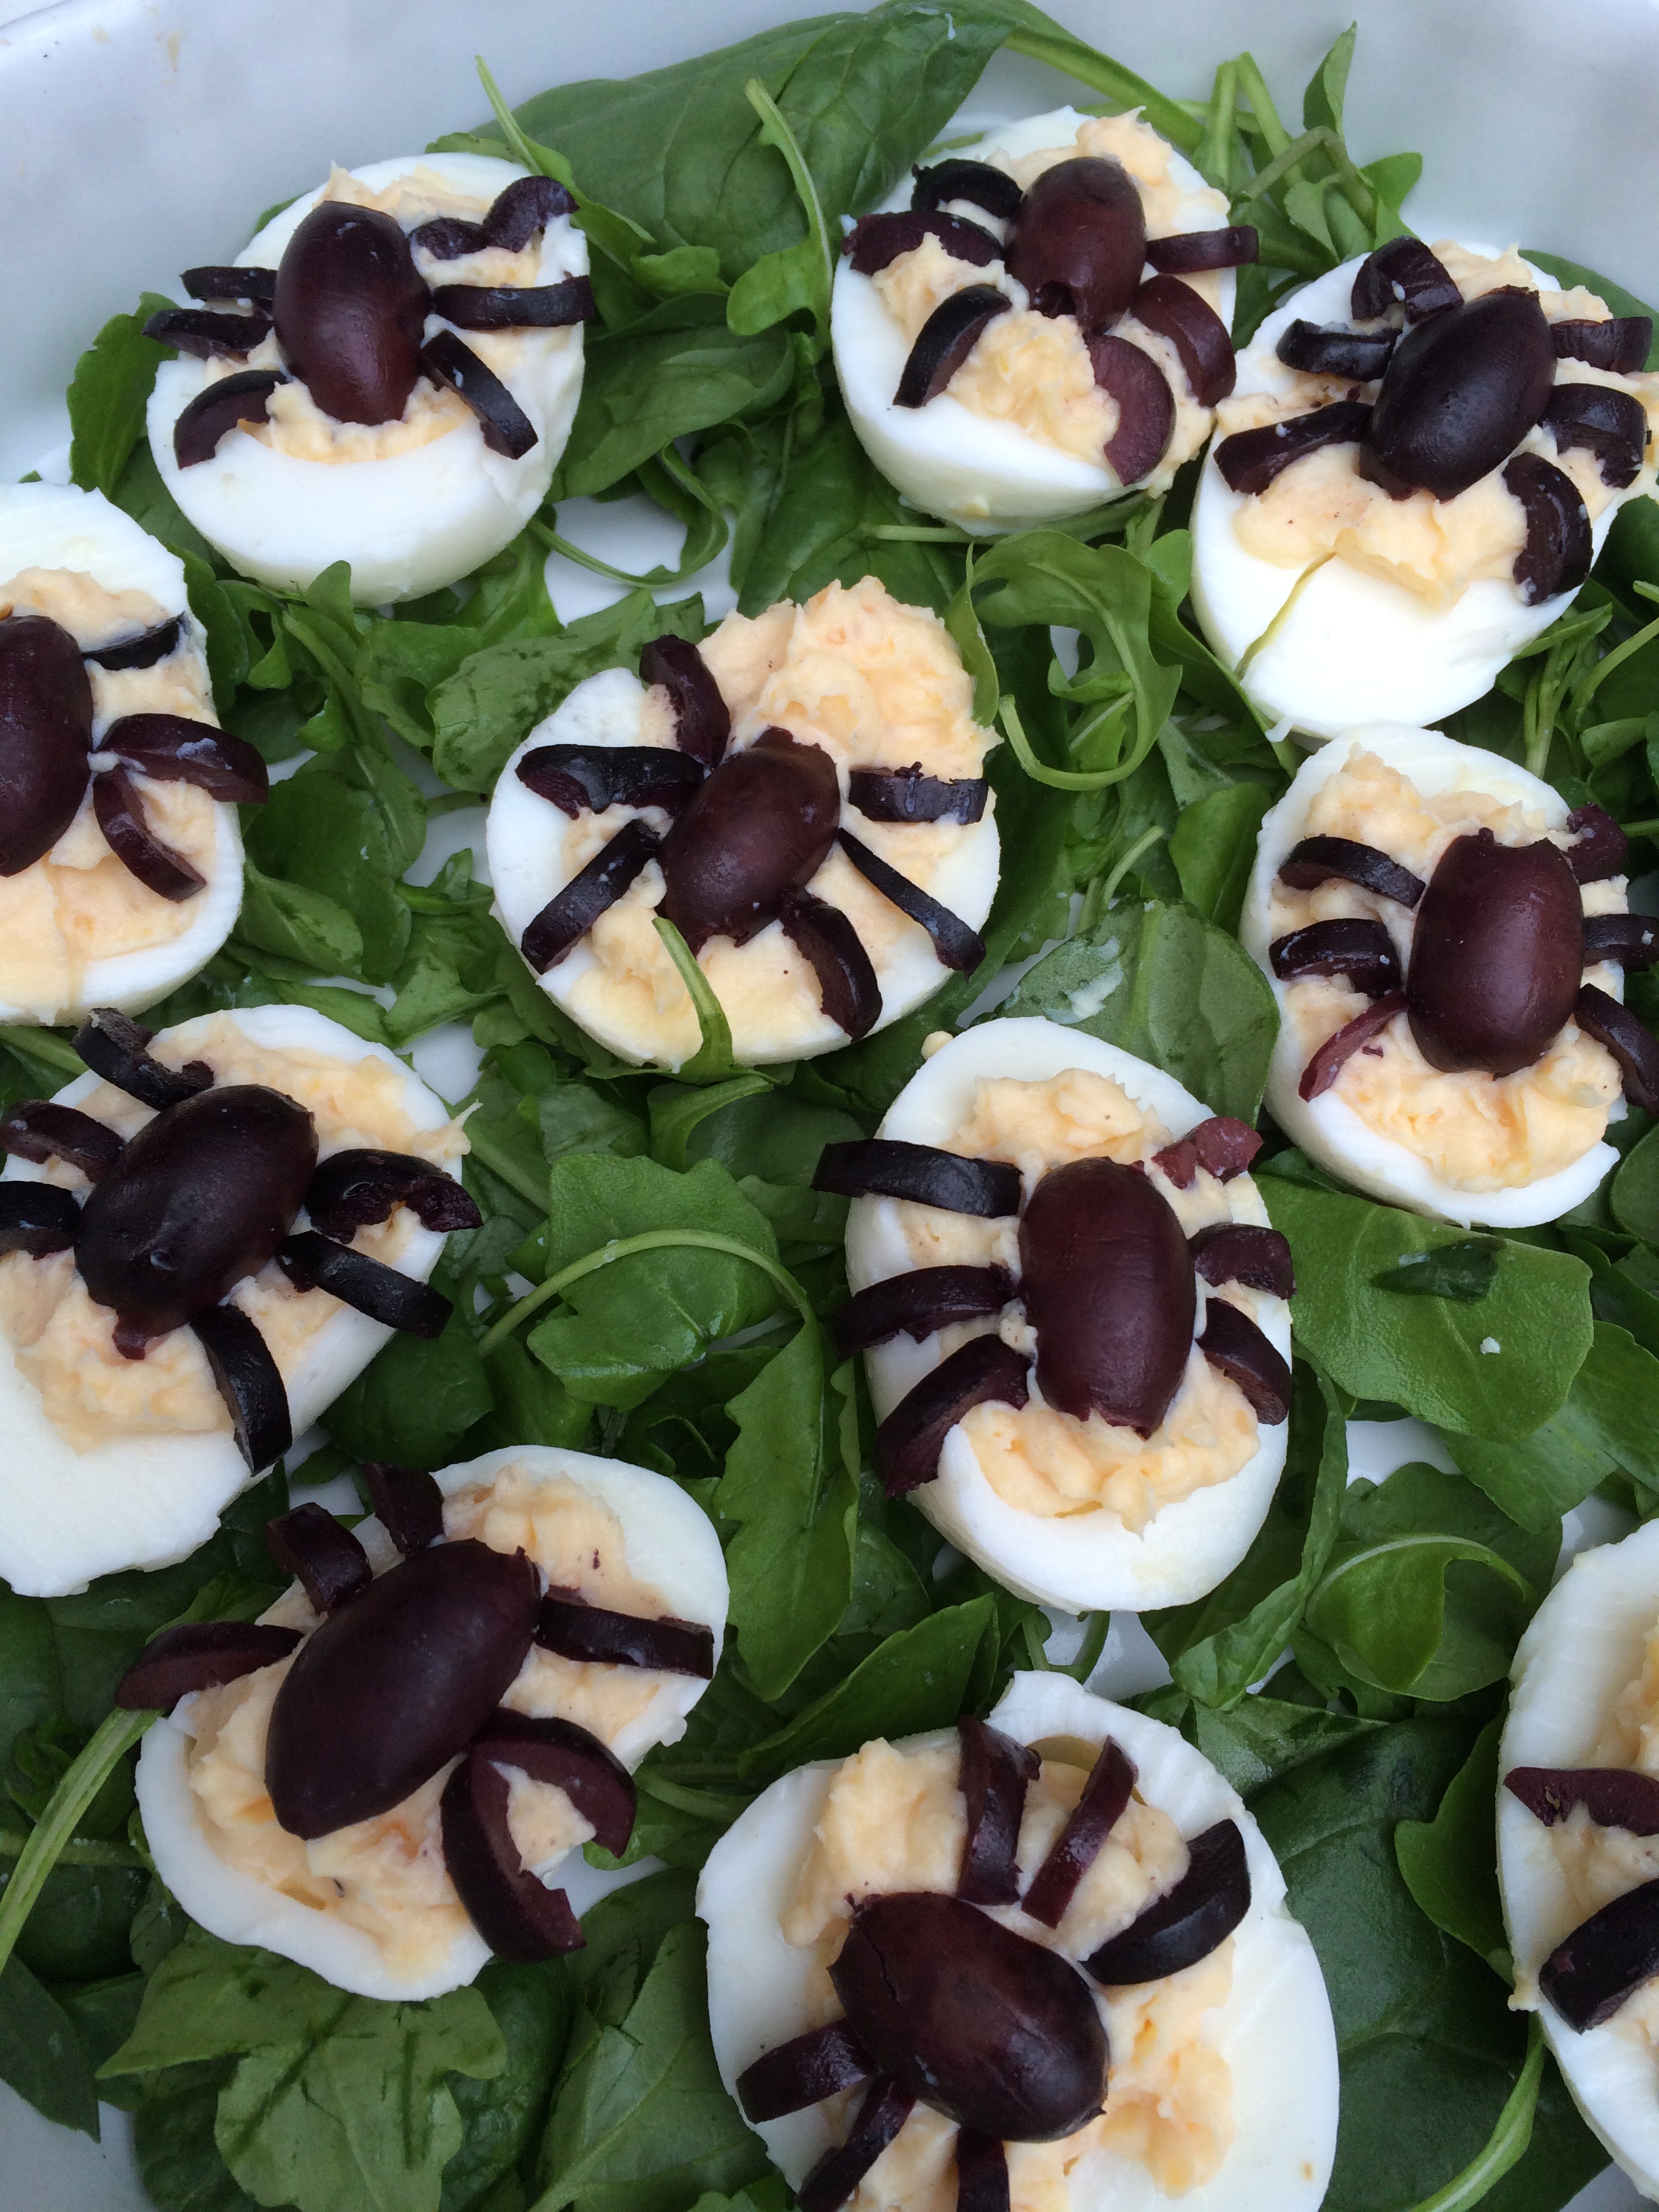 Devilled Spider Eggs. Approx 1 syn for two